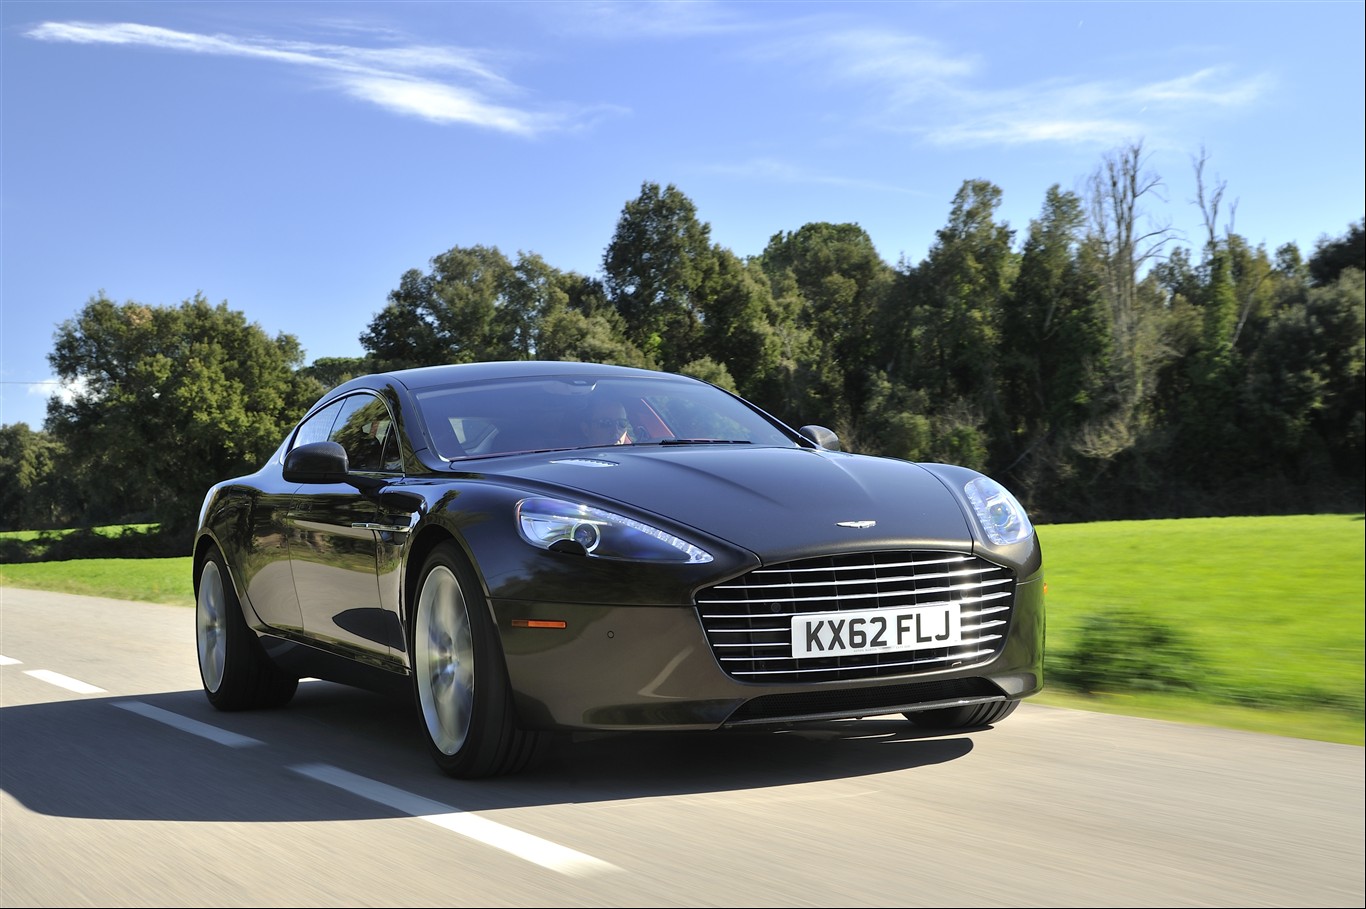 2015 Aston Martin Rapide Summary Review - The Car Connection